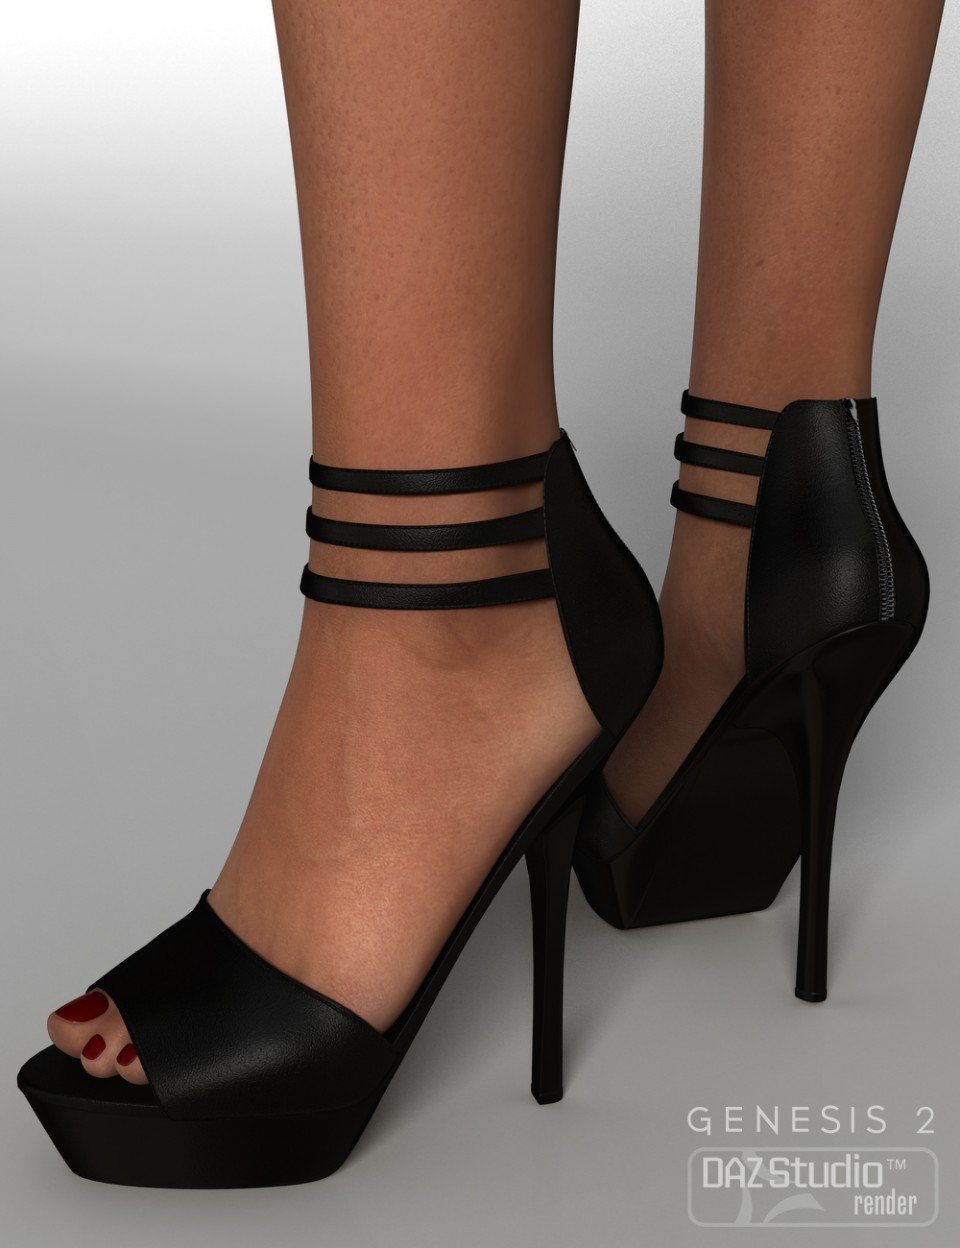 Lany Shoes for Genesis 2 Female(s)_DAZ3D下载站